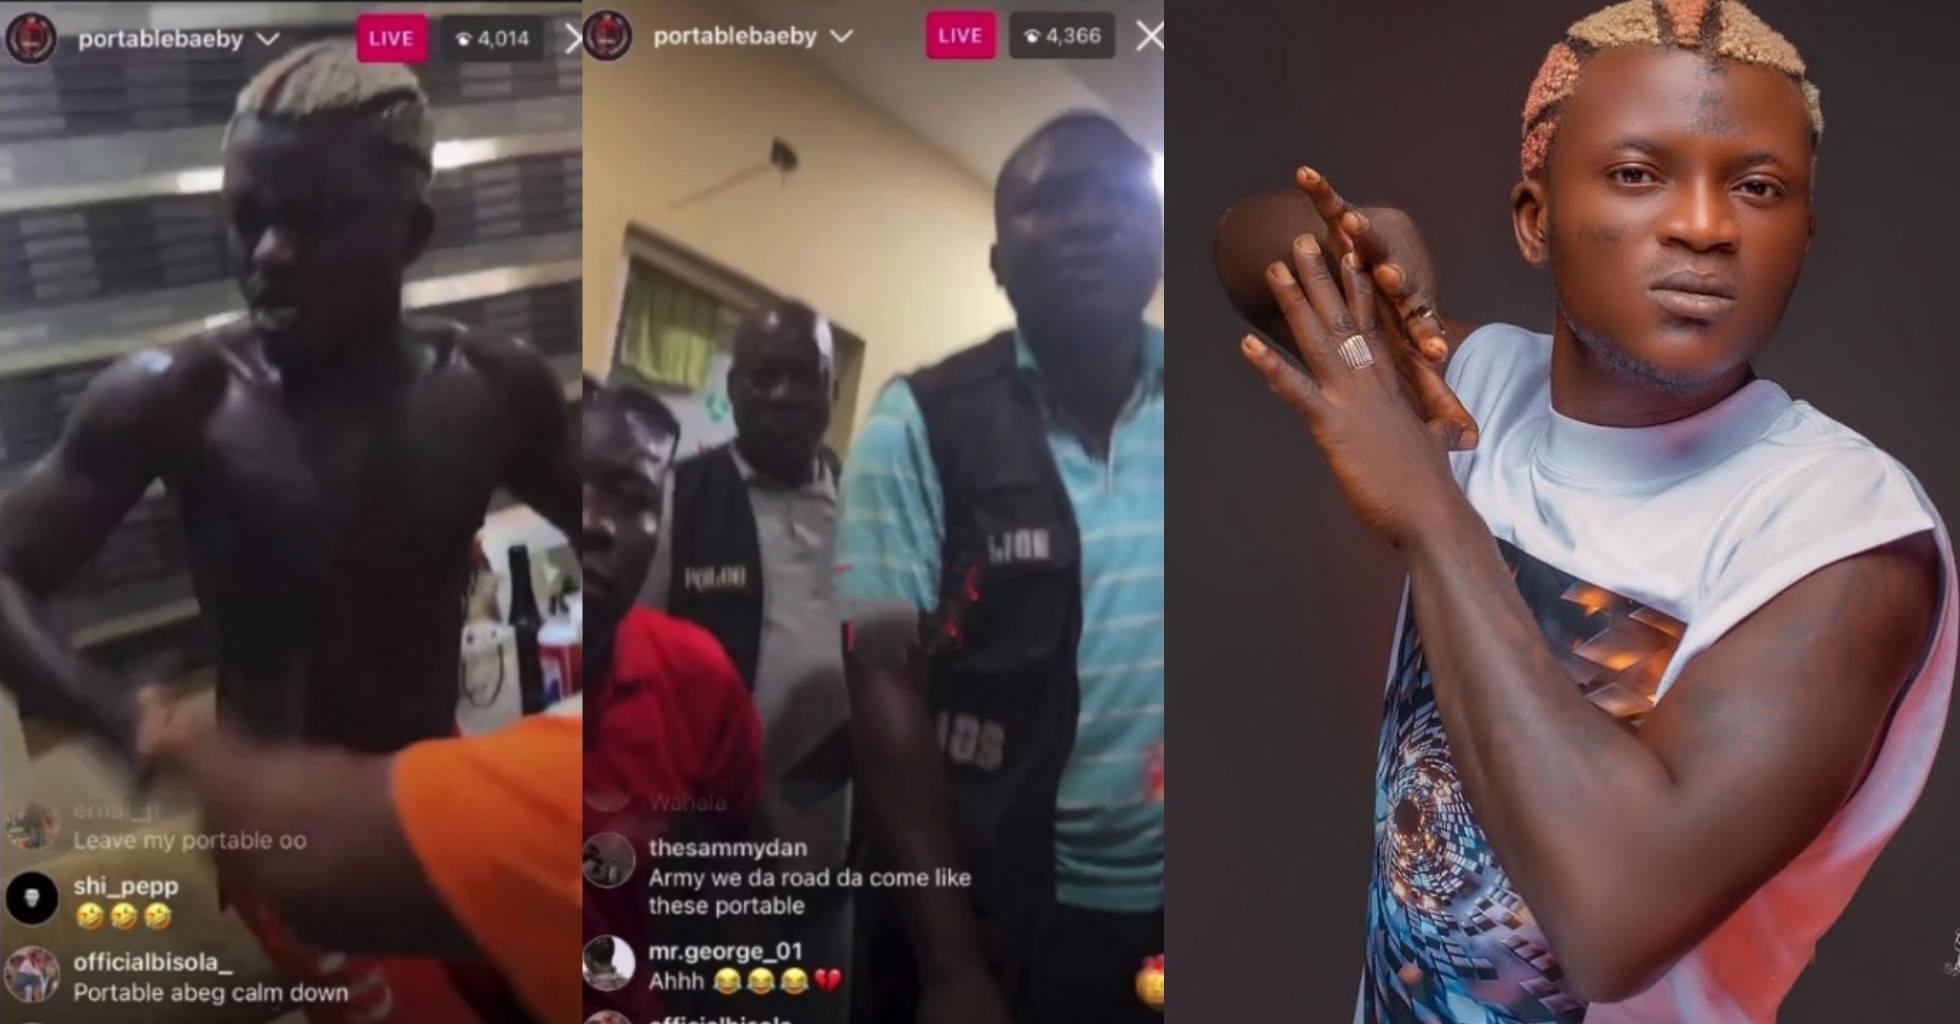 "I work for Tinubu"- Portable fumes, confronts police officers for attempting to arrest him in his bar- VIDEO